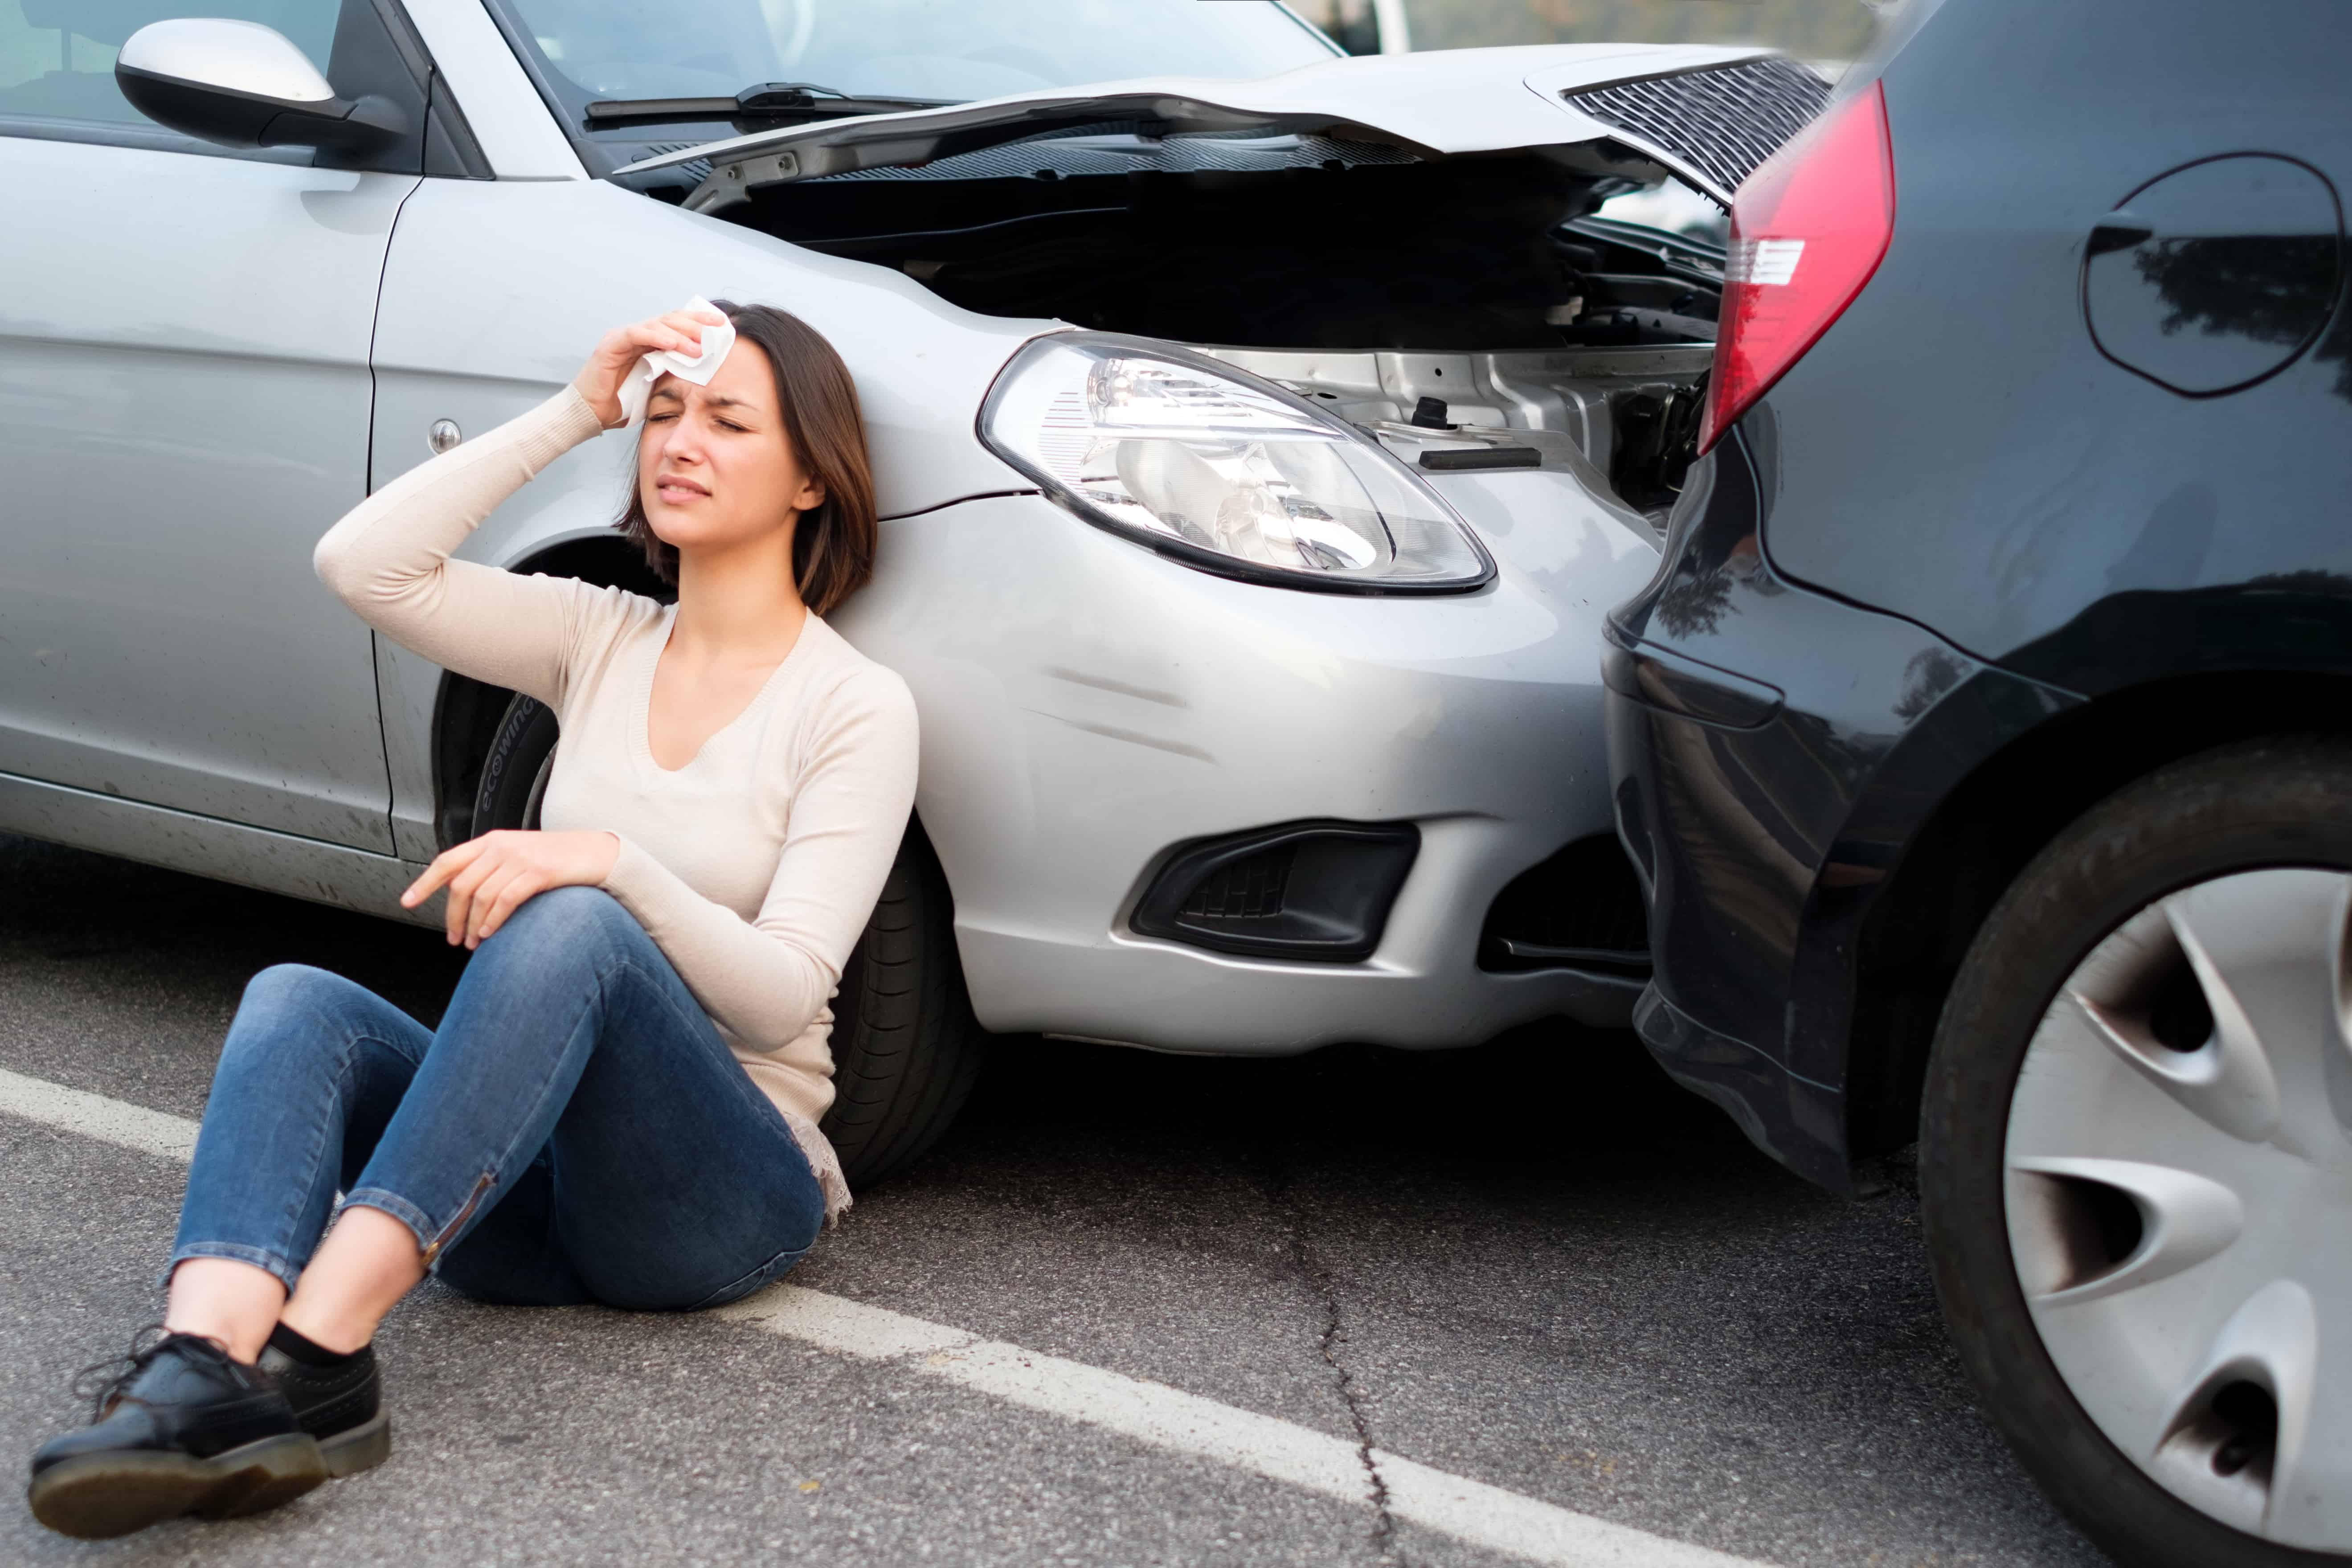 How to Calculate a Rear End Car Accident Settlement